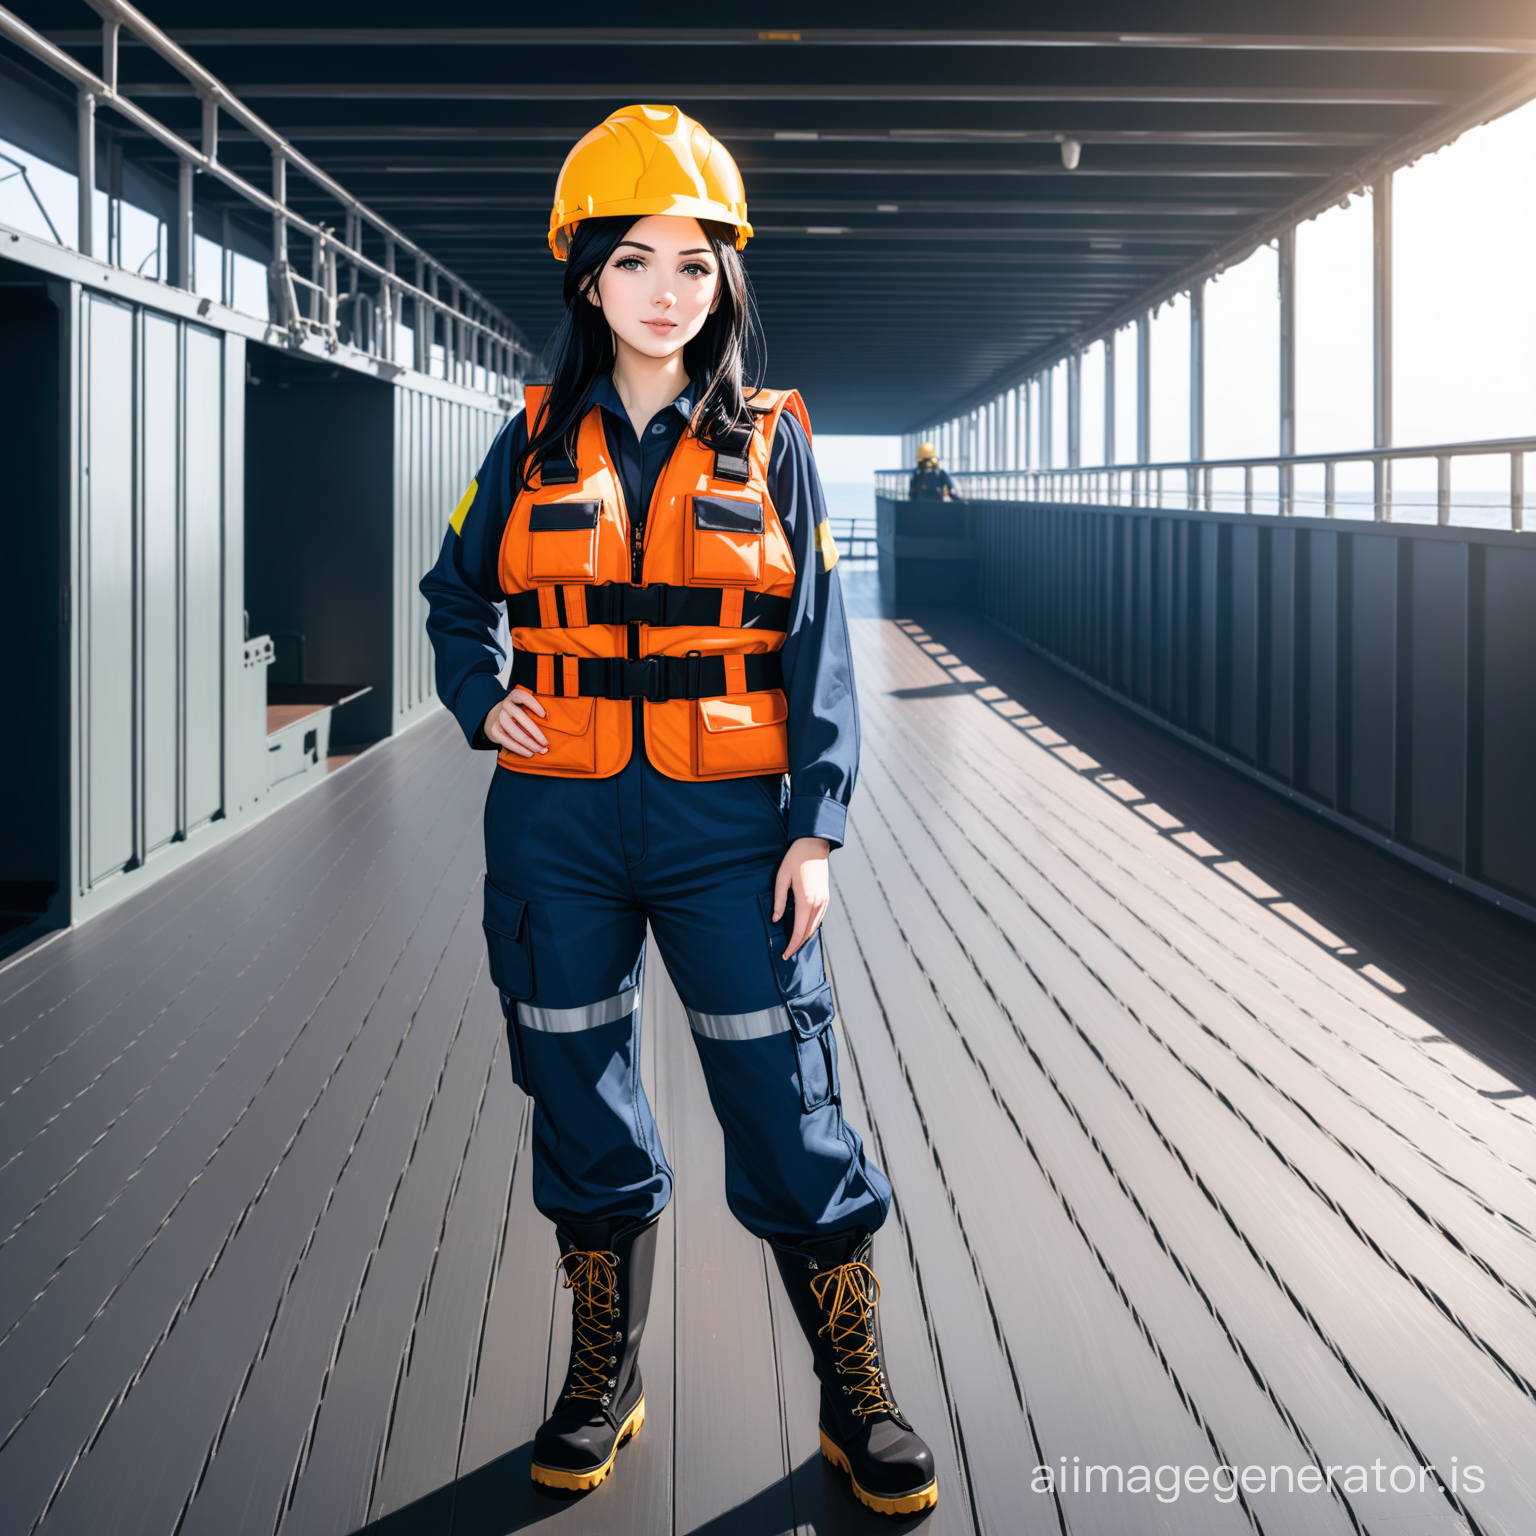 white girl with black hair wearing safety boots, life vest helmet and navy overall standing in a ship`s deck